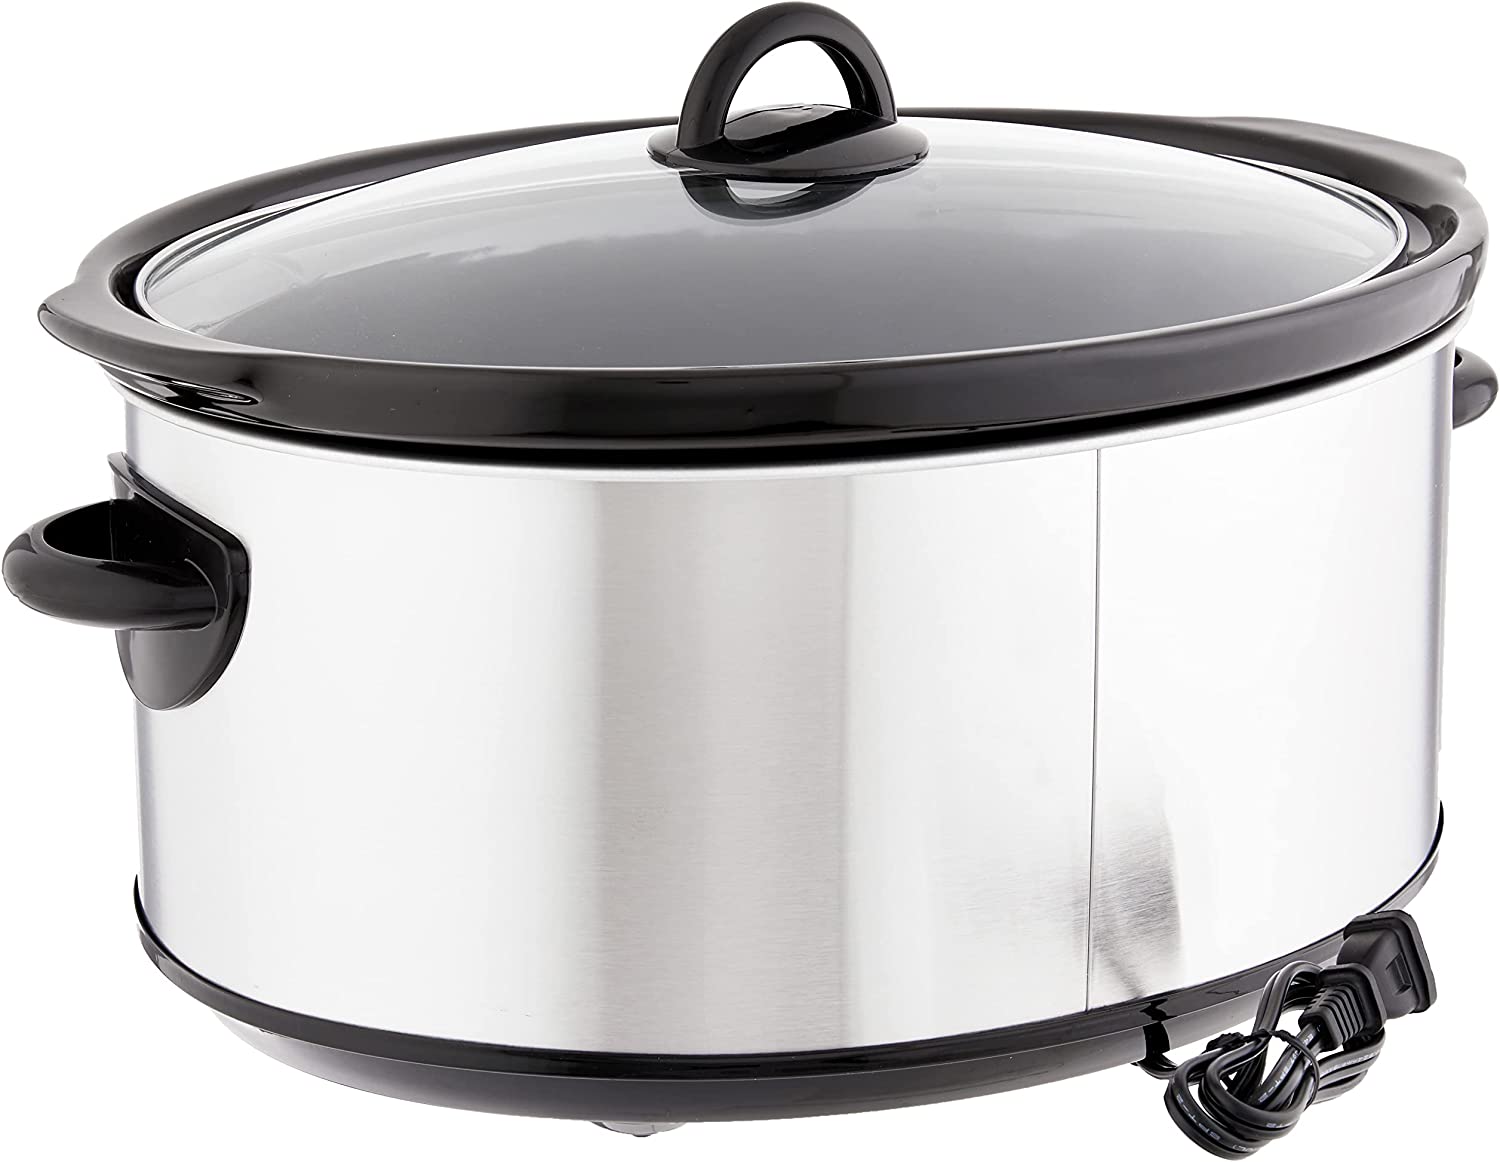 Crock-Pot Large 8 Quart Slow Cooker with Mini 16 Ounce Food Warmer